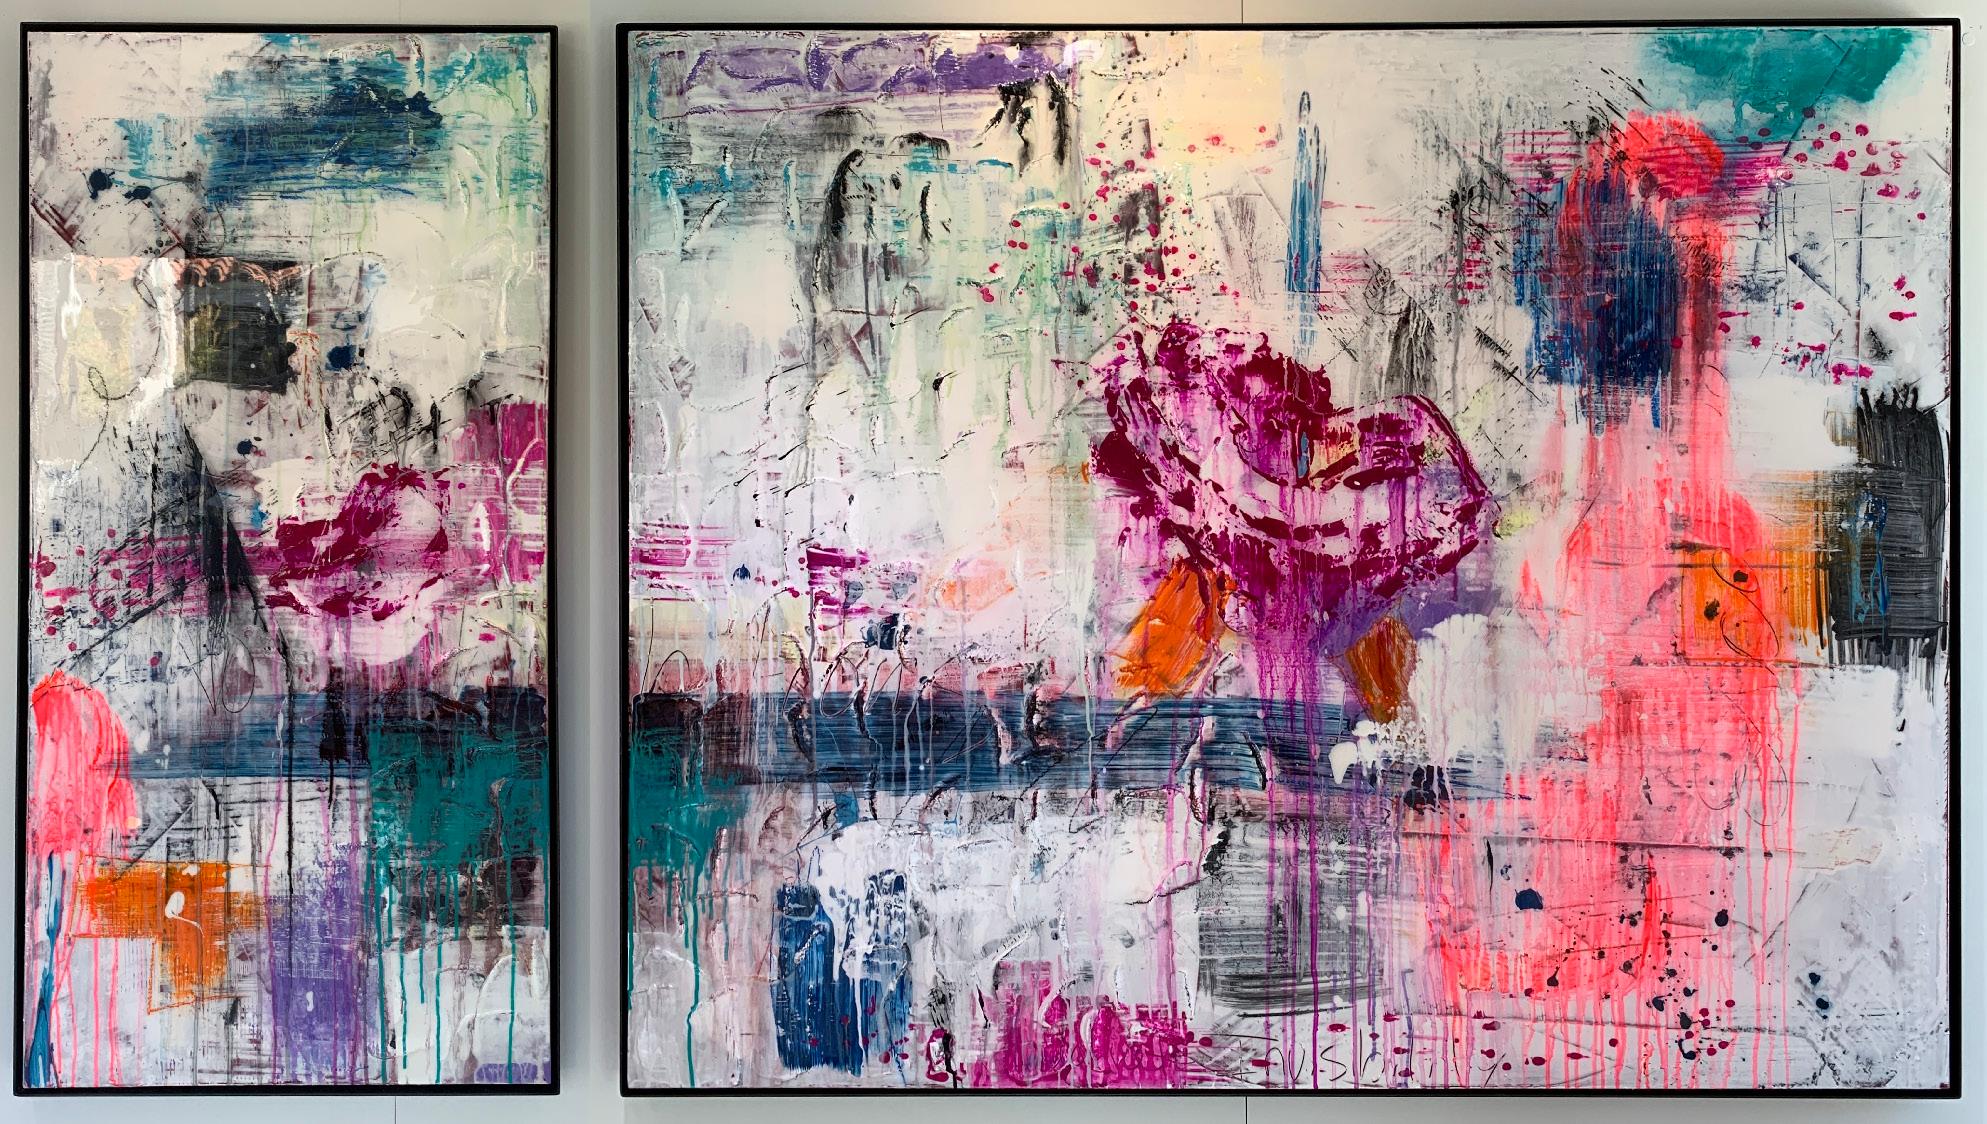 Peri Gutierrez "Contemplative" Diptych Mixed Media Canvas Abstract Acrylic Frame Abstract Expressionism Multicolor Resin Female Women Woman

Guru and Student (in Pink) sit and converse in many means.  Begun in 2007, completed in 2019.

Mixed Media